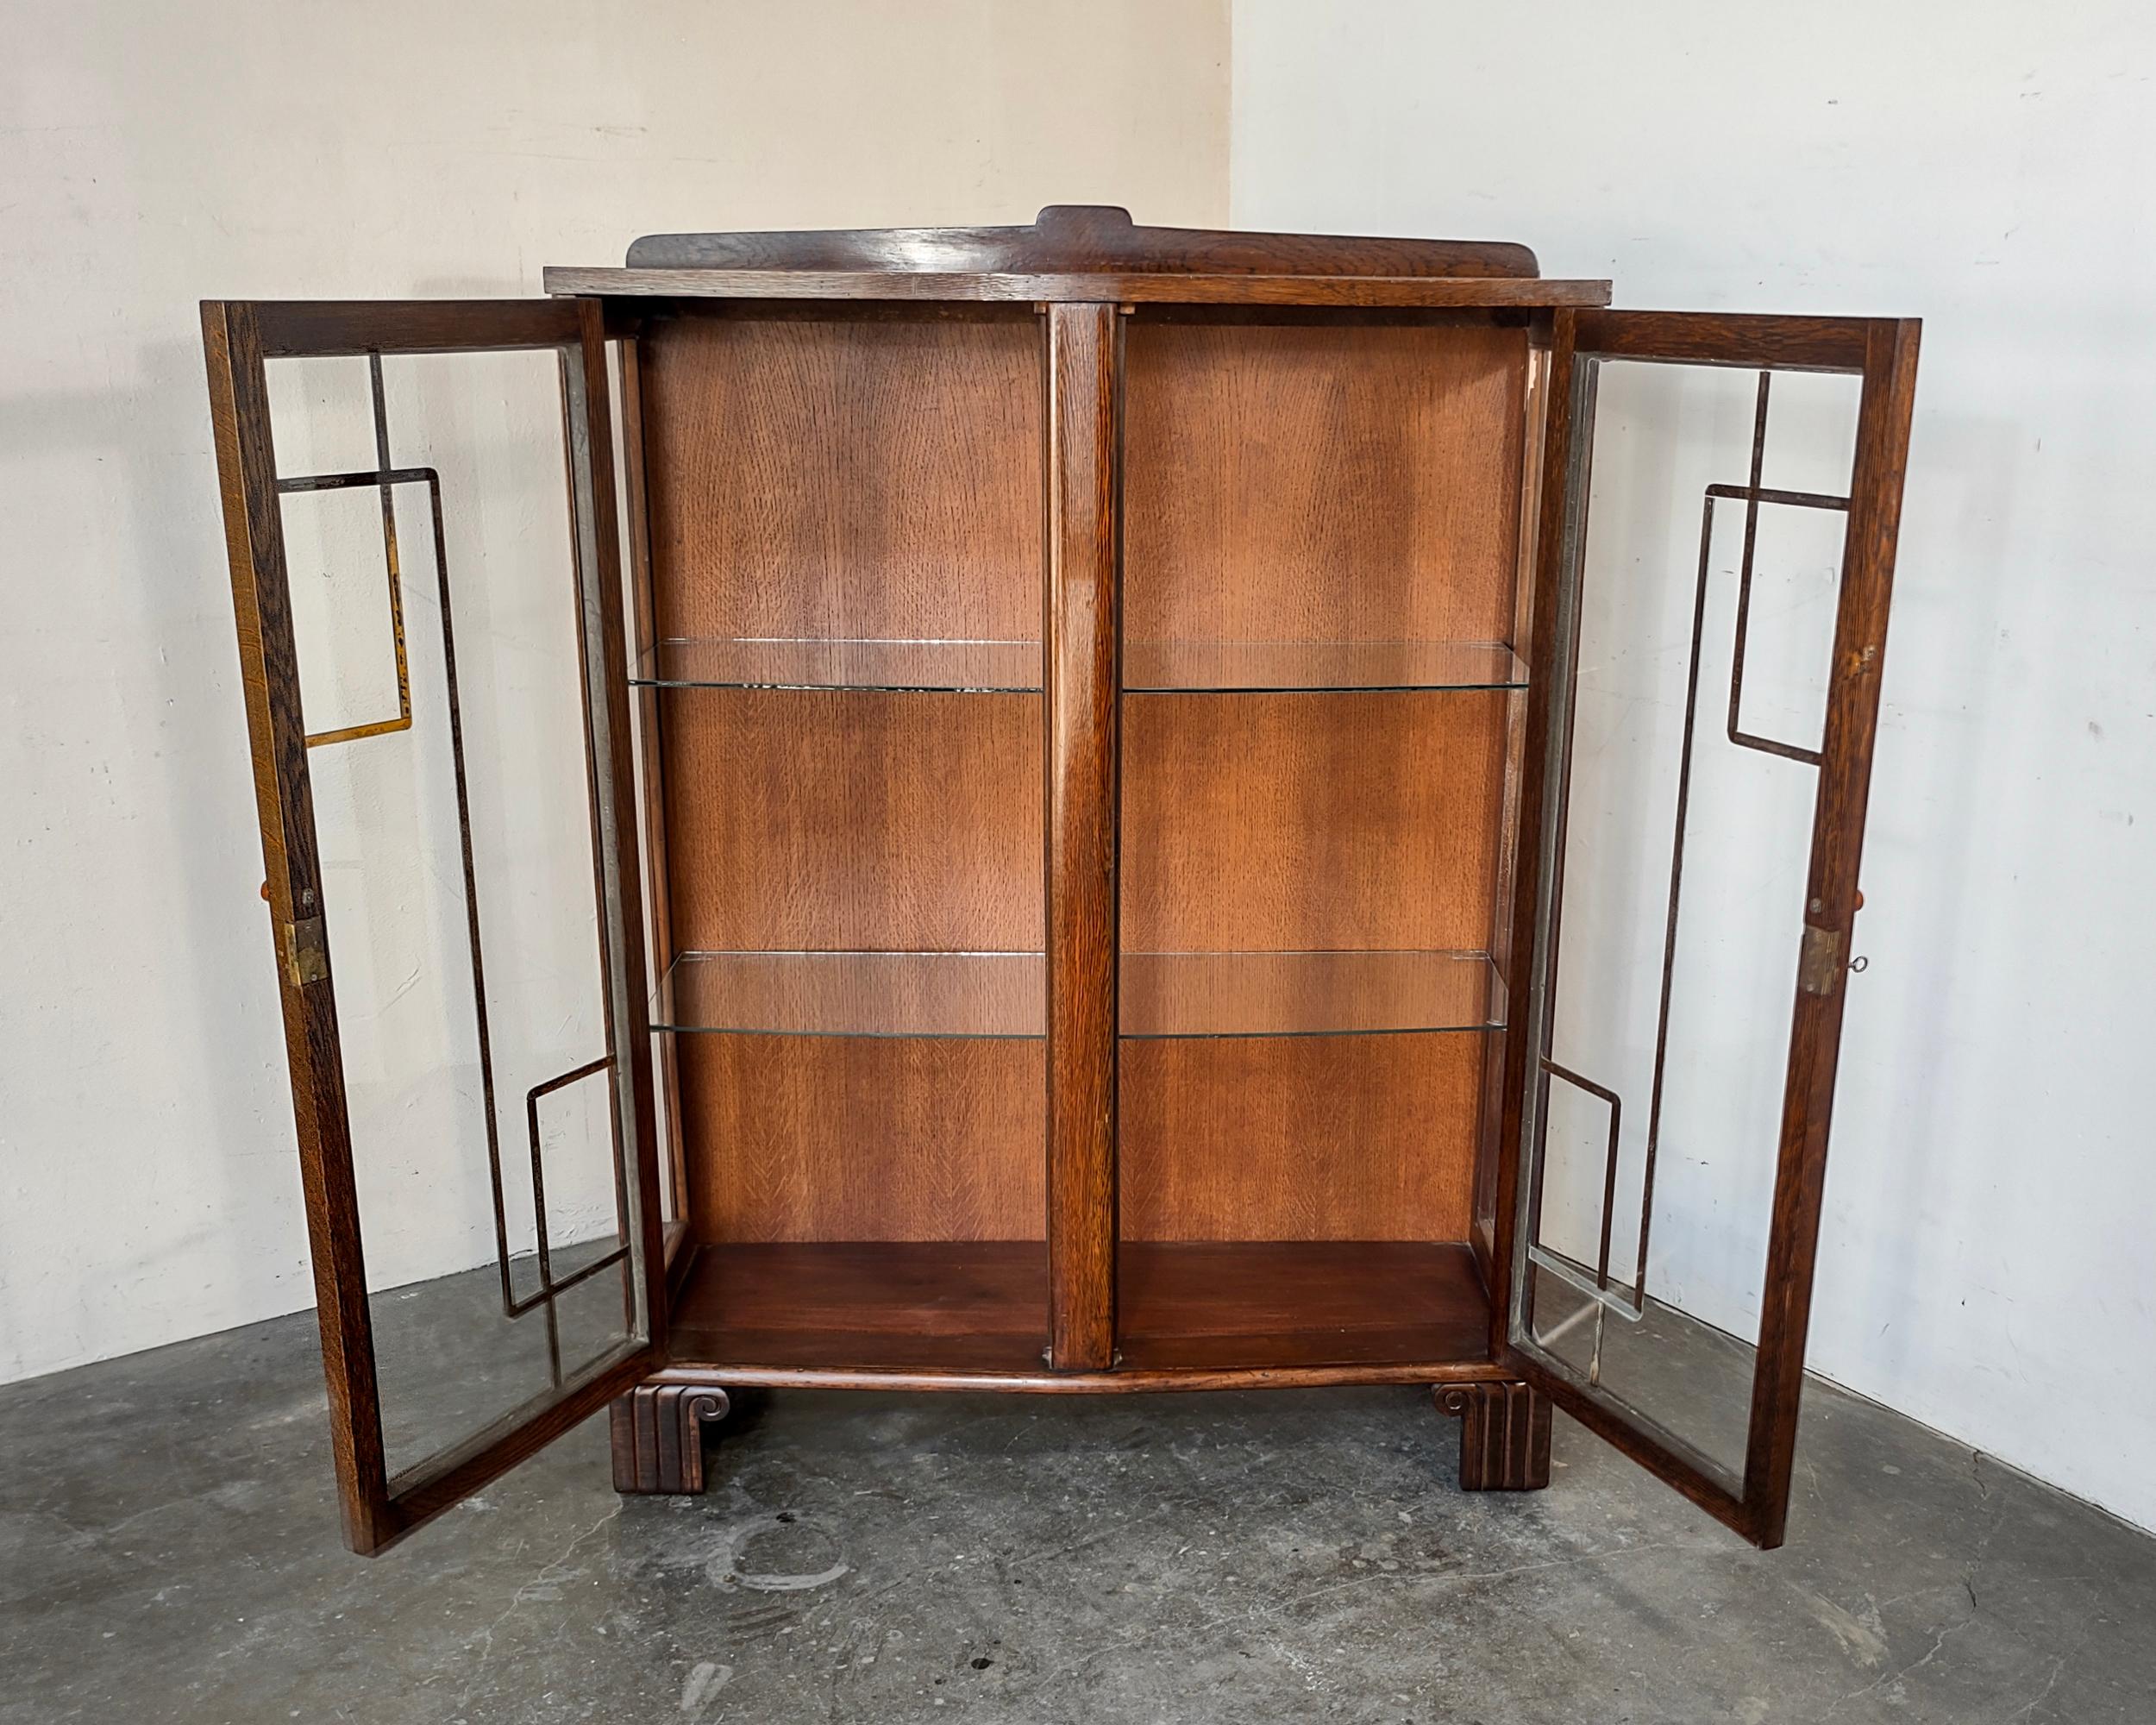 1920s Art Deco glass display cabinet featuring two slightly curved glass shelves inside. Beautiful design details include column feet, mirrored glass design on doors and bakelite pulls. Original locking key included. Overall great vintage condition